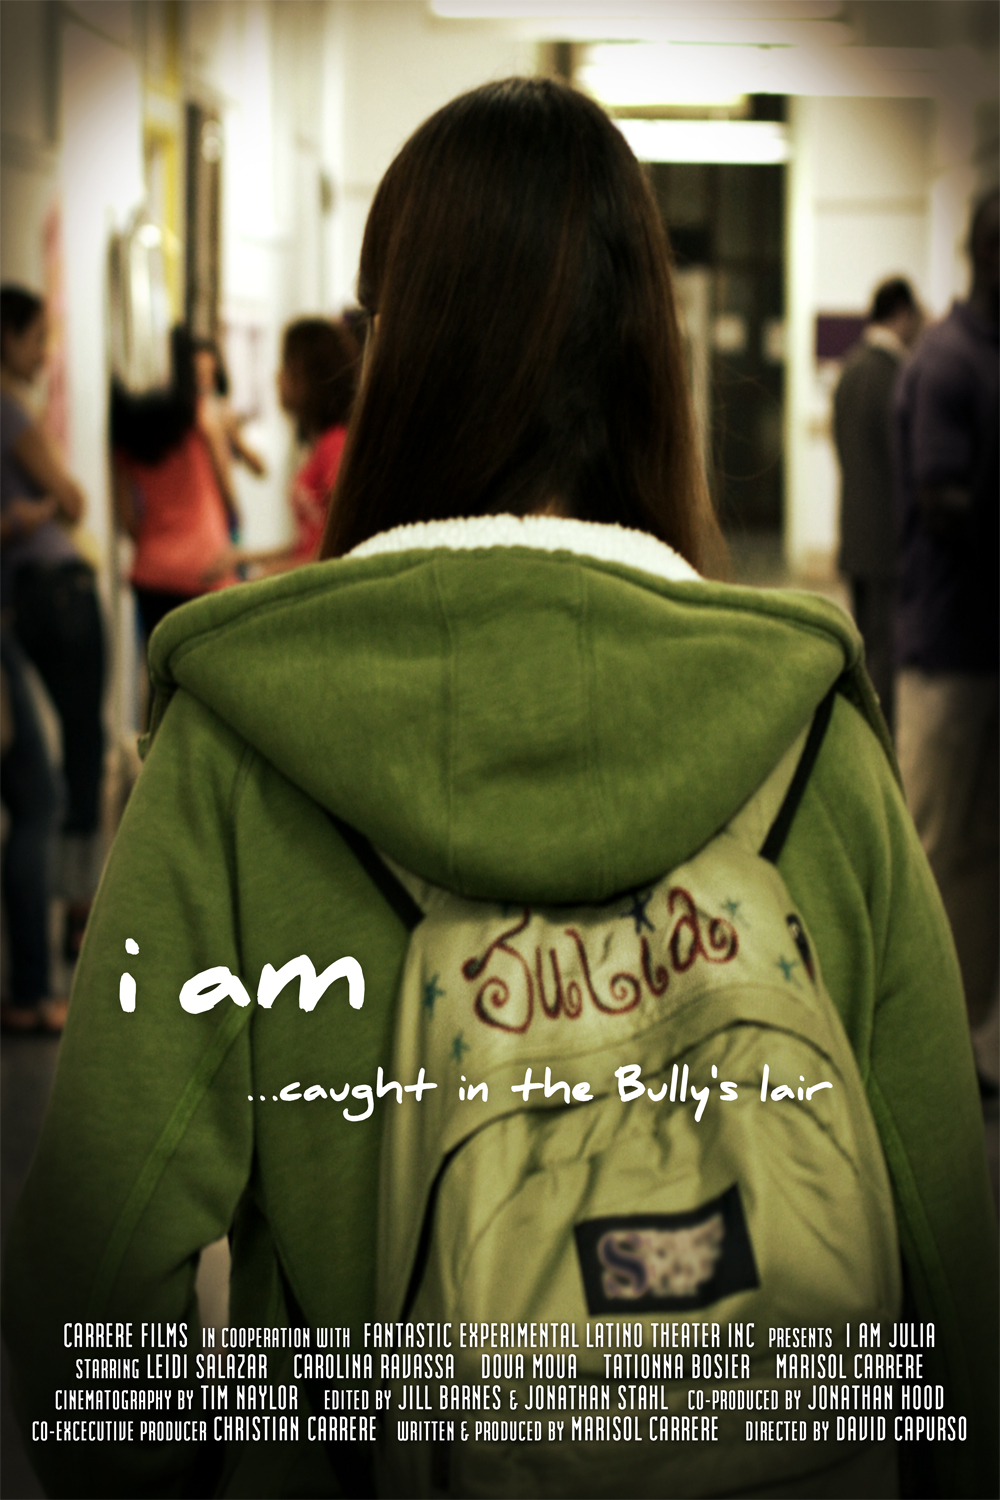 I am Julia....caught in the bully's lair, written and produced by Marisol Carrere